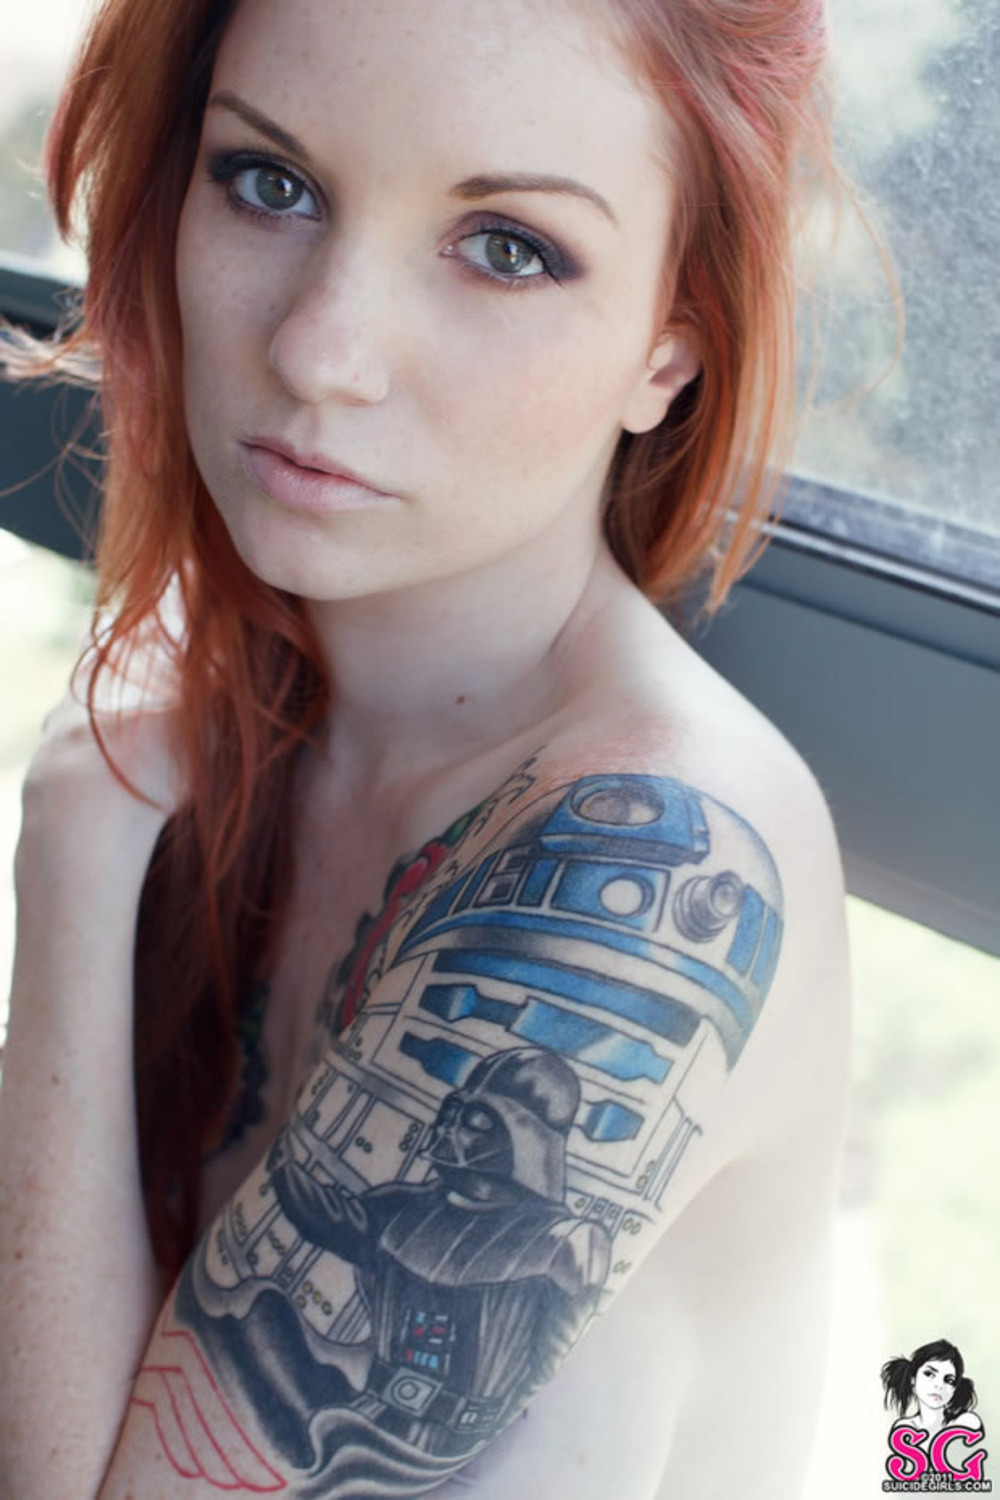 Tattooed Girl Showing Off Her Star Wars Tattooes 13